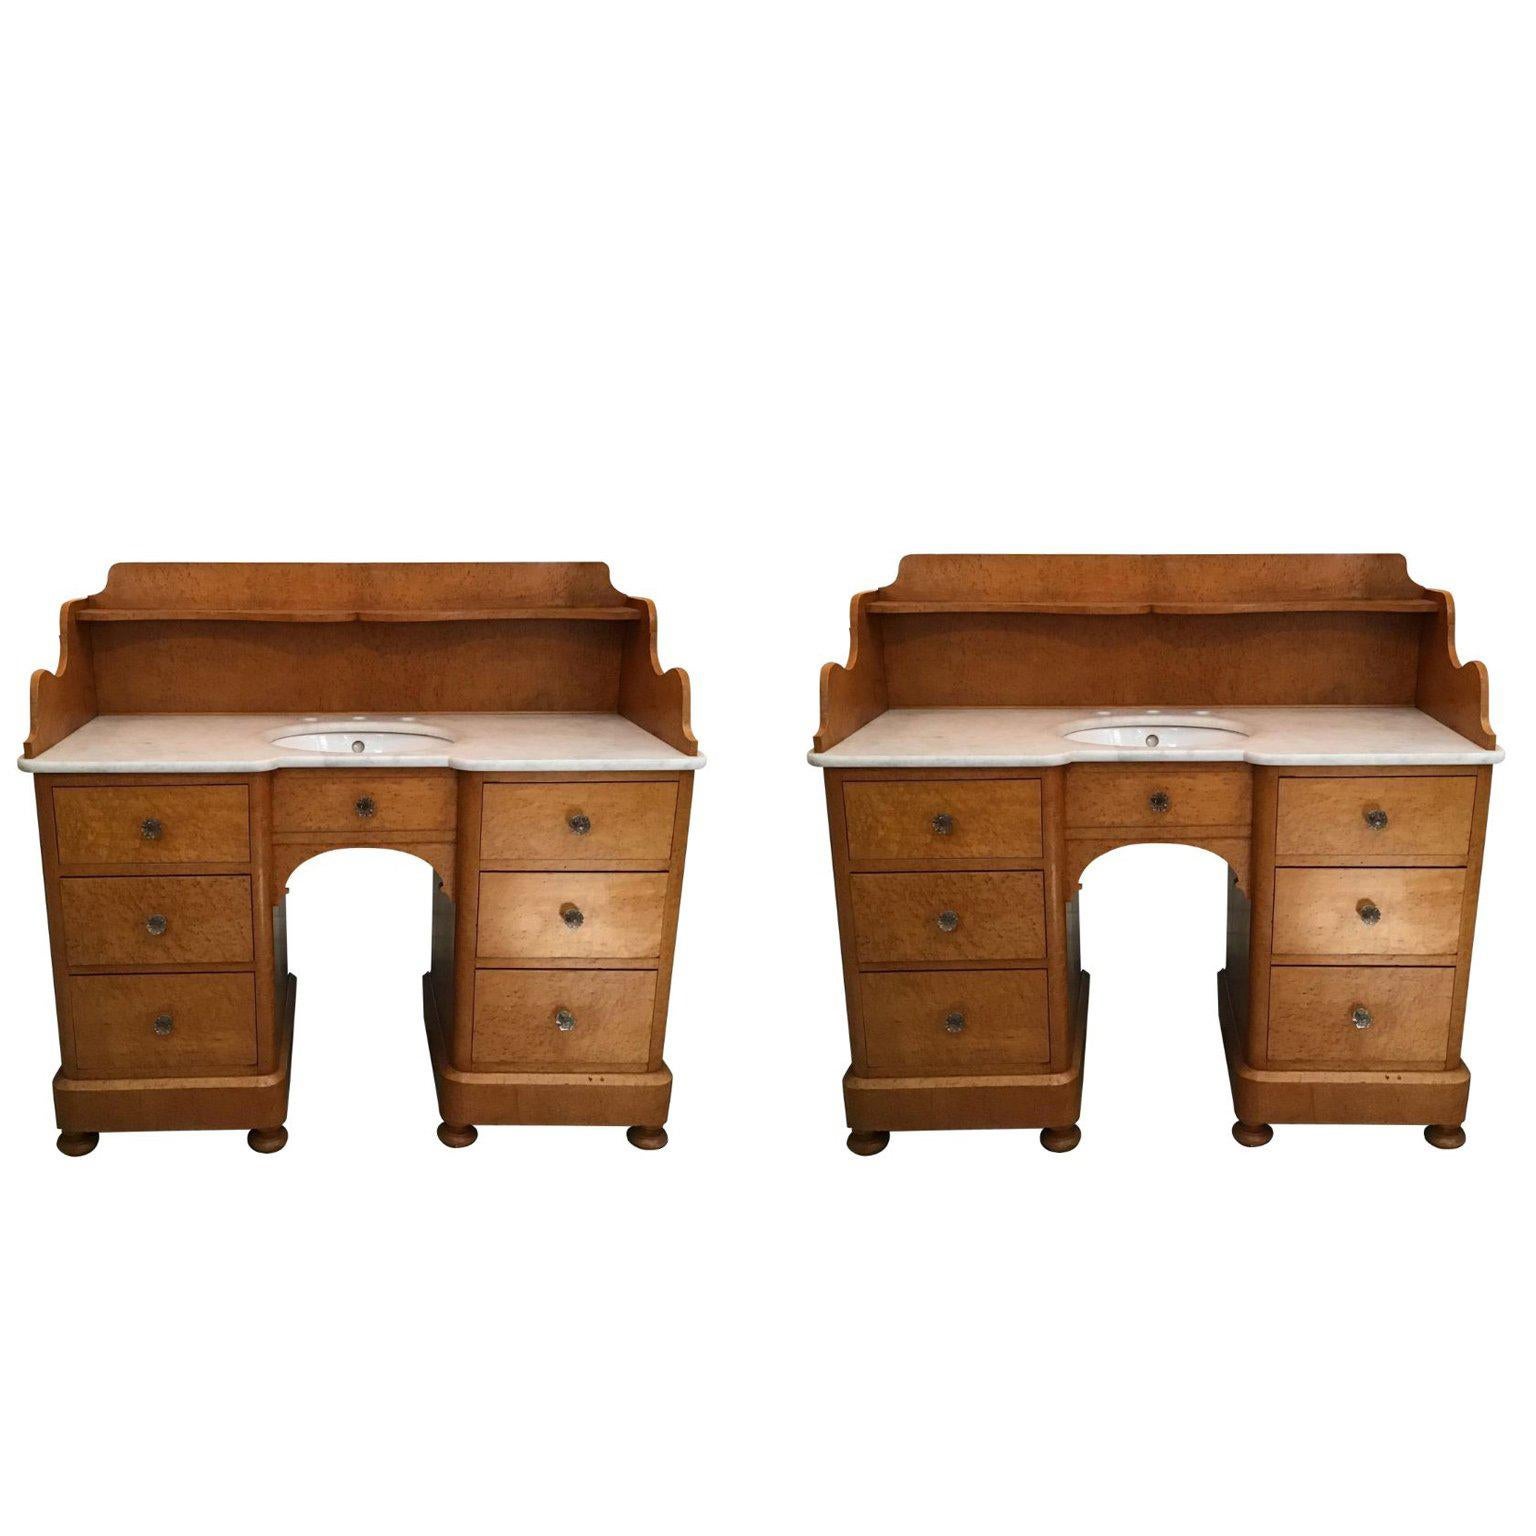 20th Century Pair of Italian Brier-Root Veneer with Carrara Marble Wash Cabinets For Sale